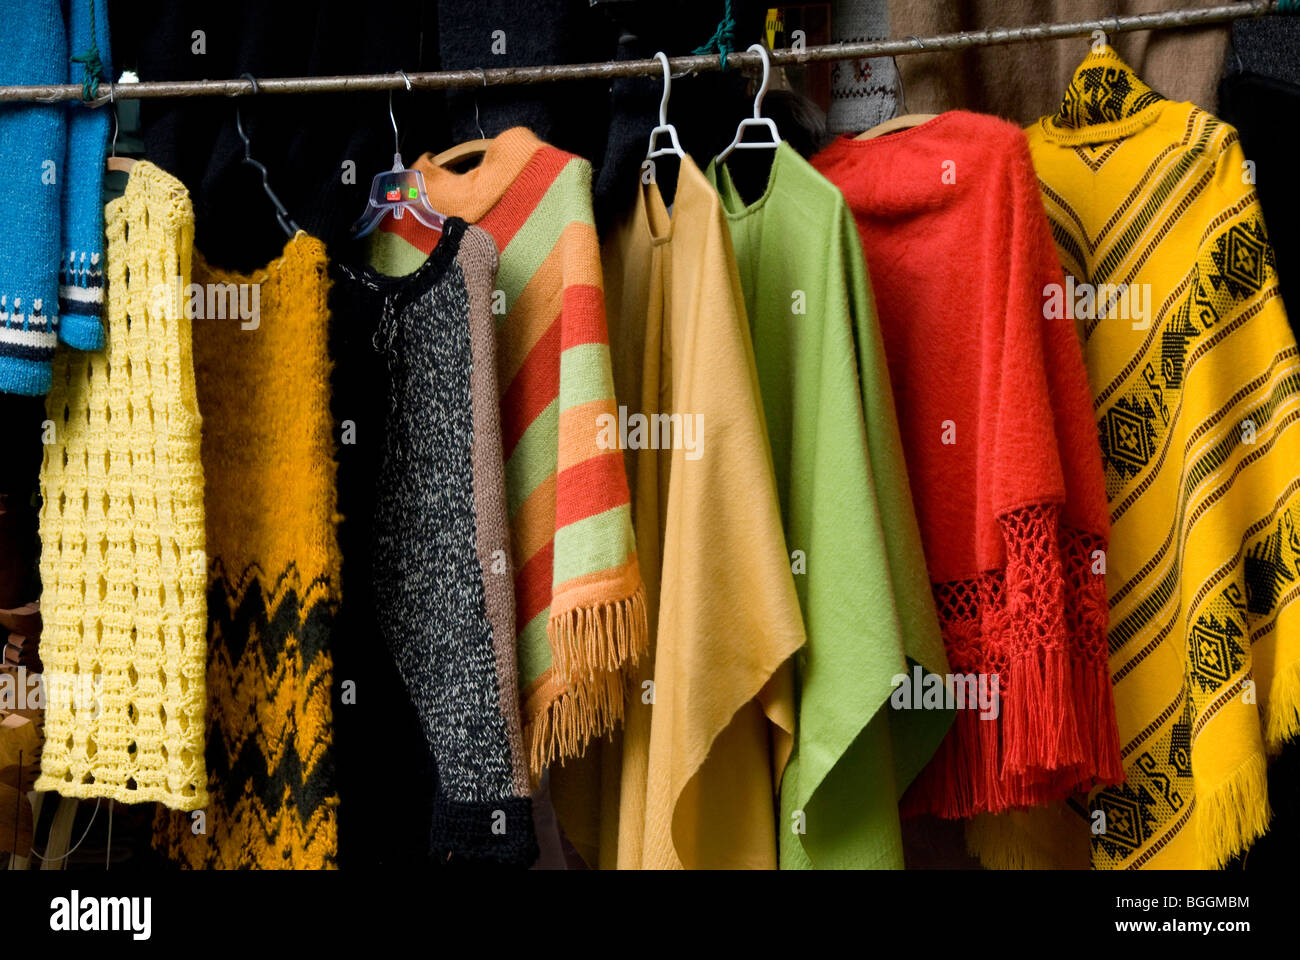 Knitted woolen ponchos in market in Puerto Varas, Los Lagos Region (Lake District) of Chile Stock Photo